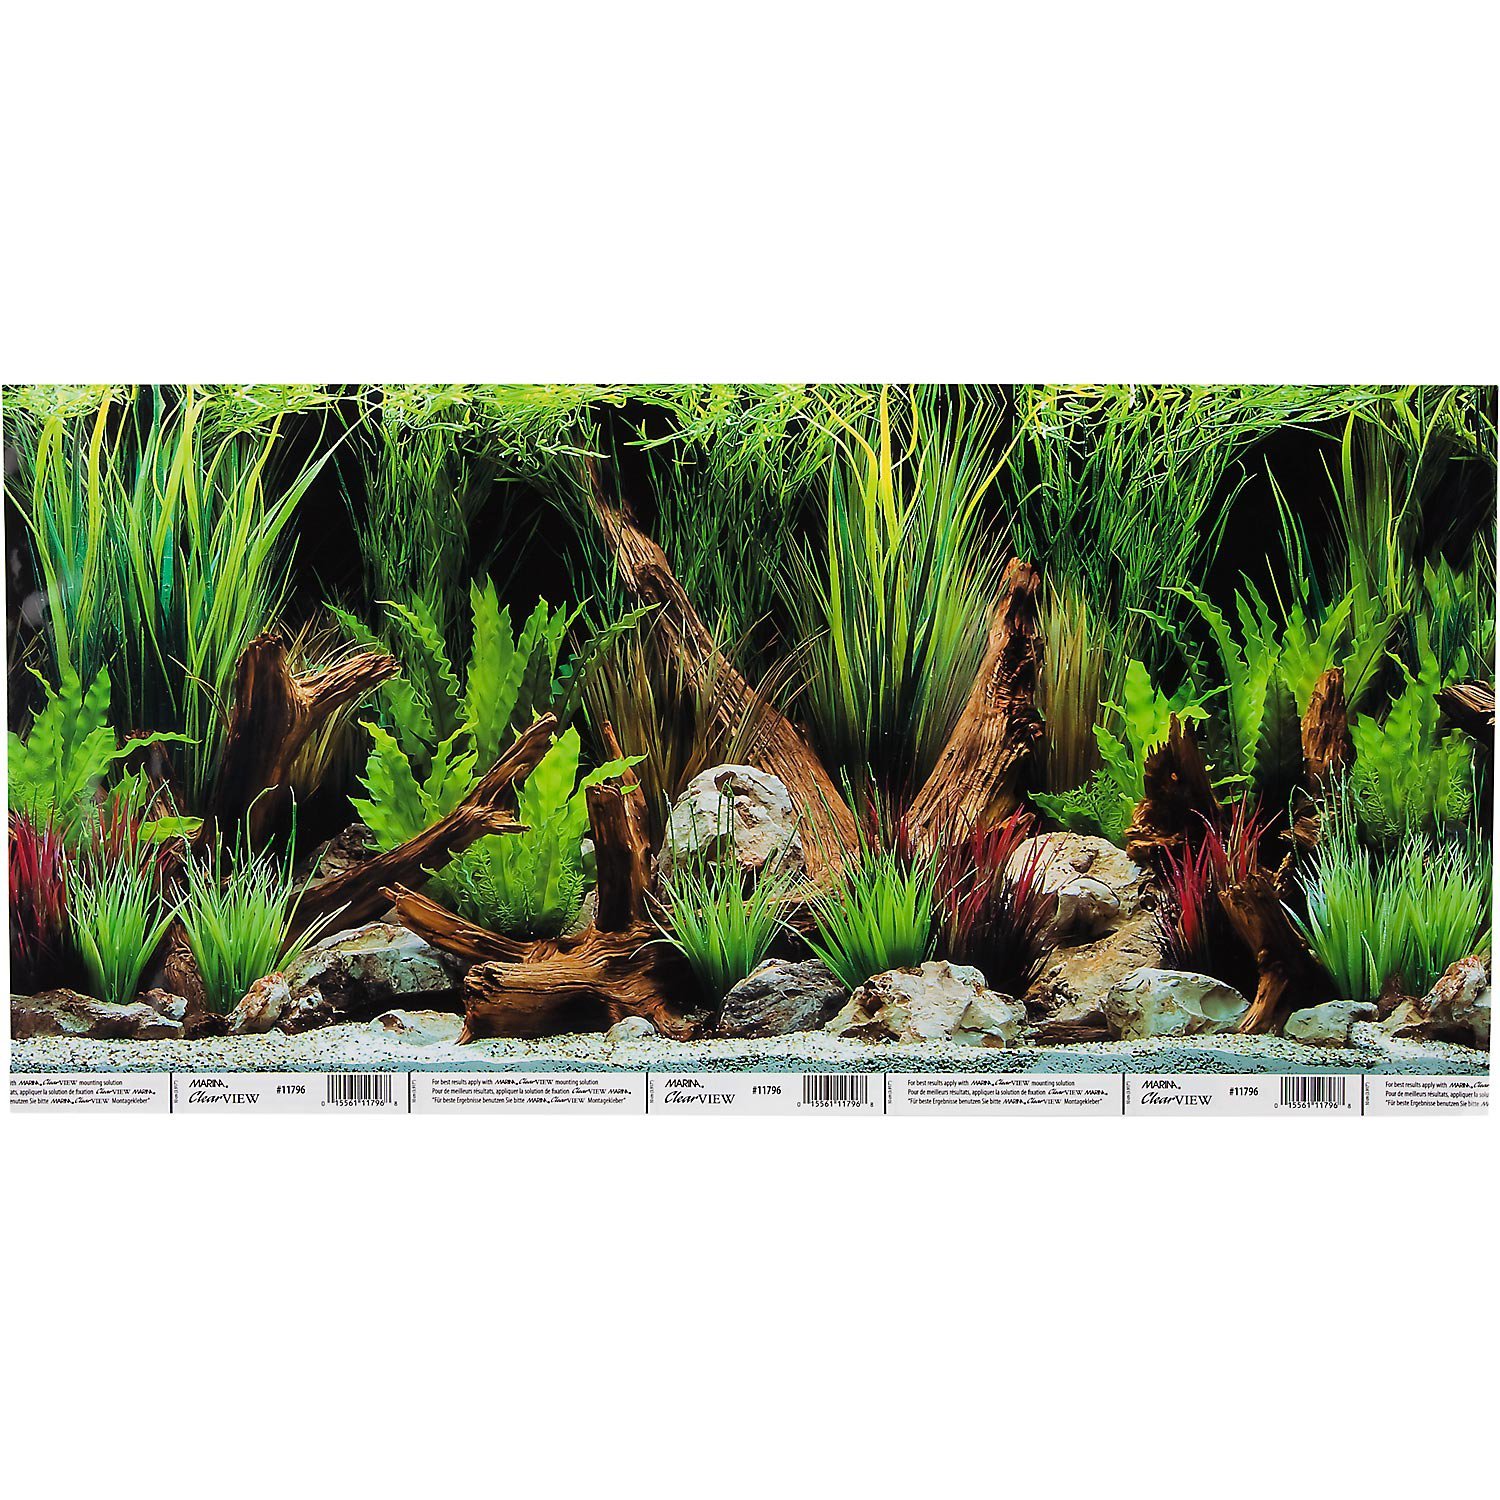 Fish tank background how to stick on